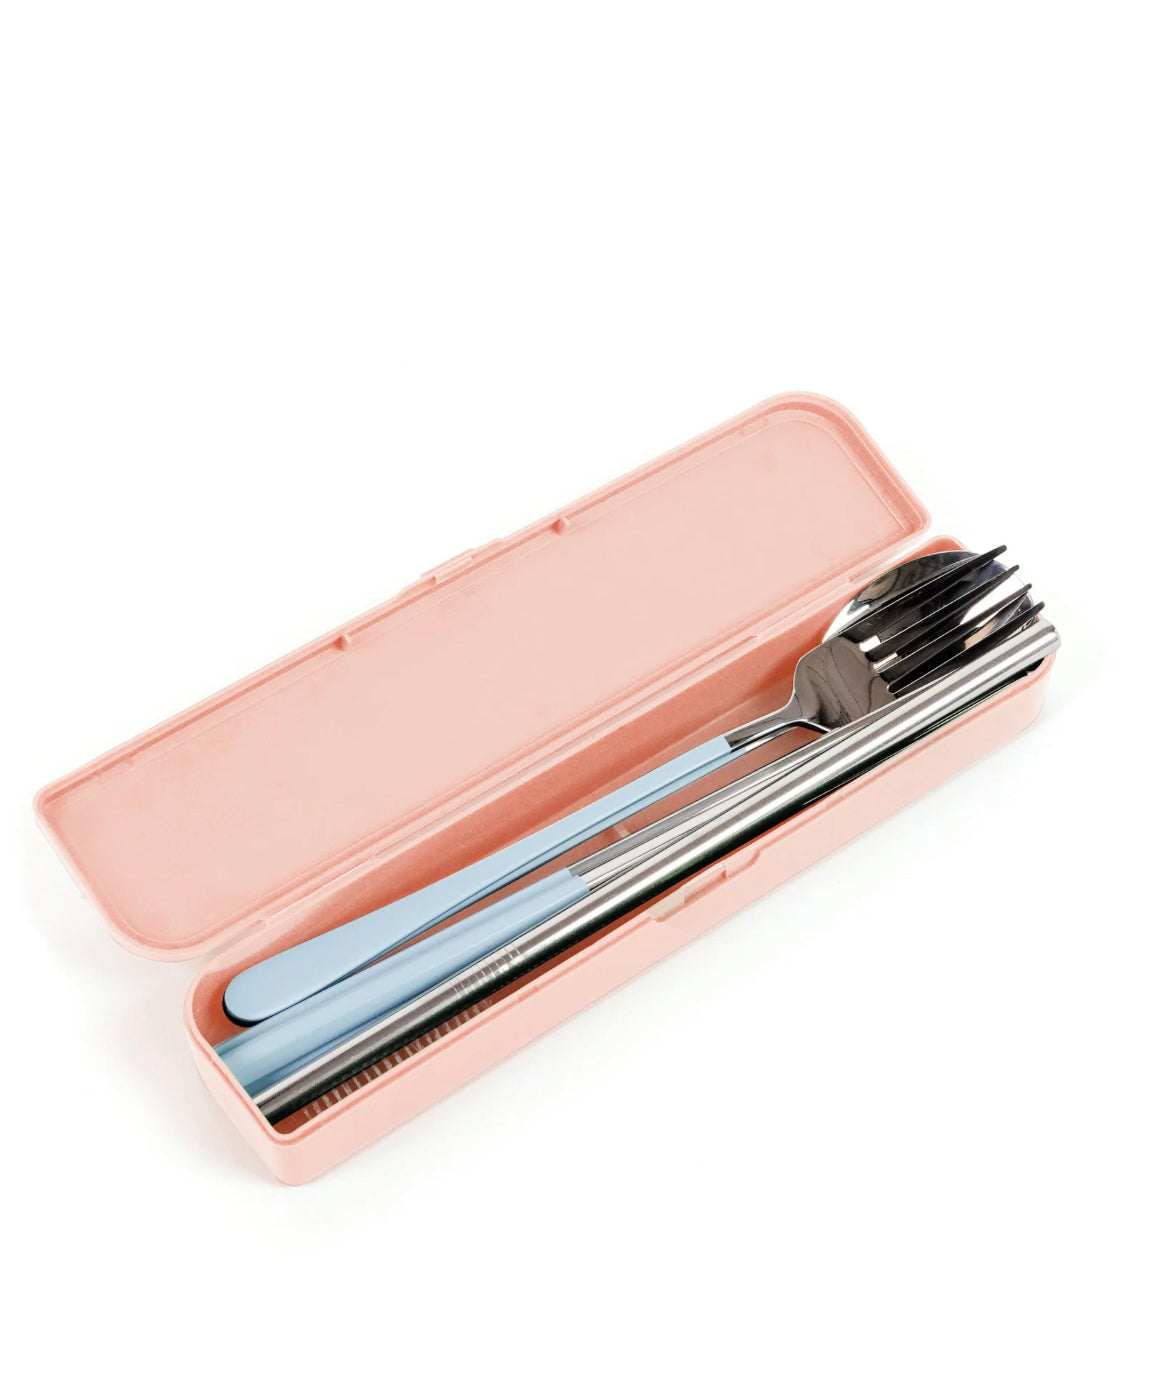 Cutlery Kit | Silver with Powder Blue Handle